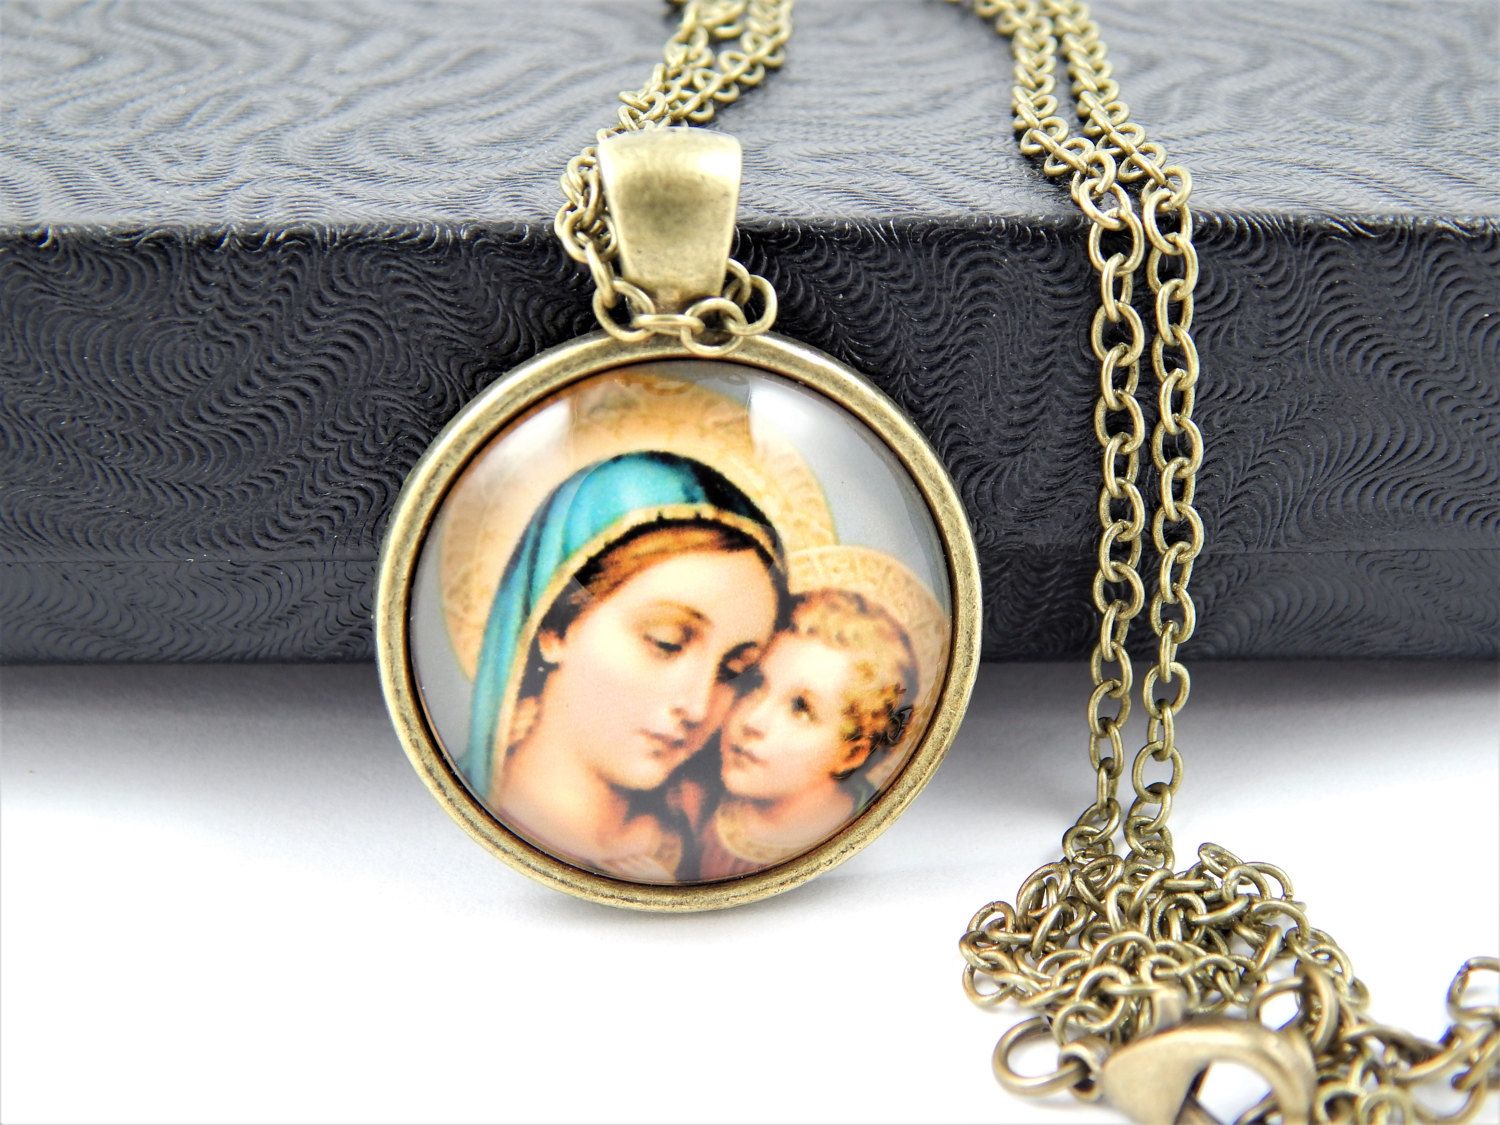 Are you purchasing catholic jewelry from stores? Here are the mistakes that should be avoided!!